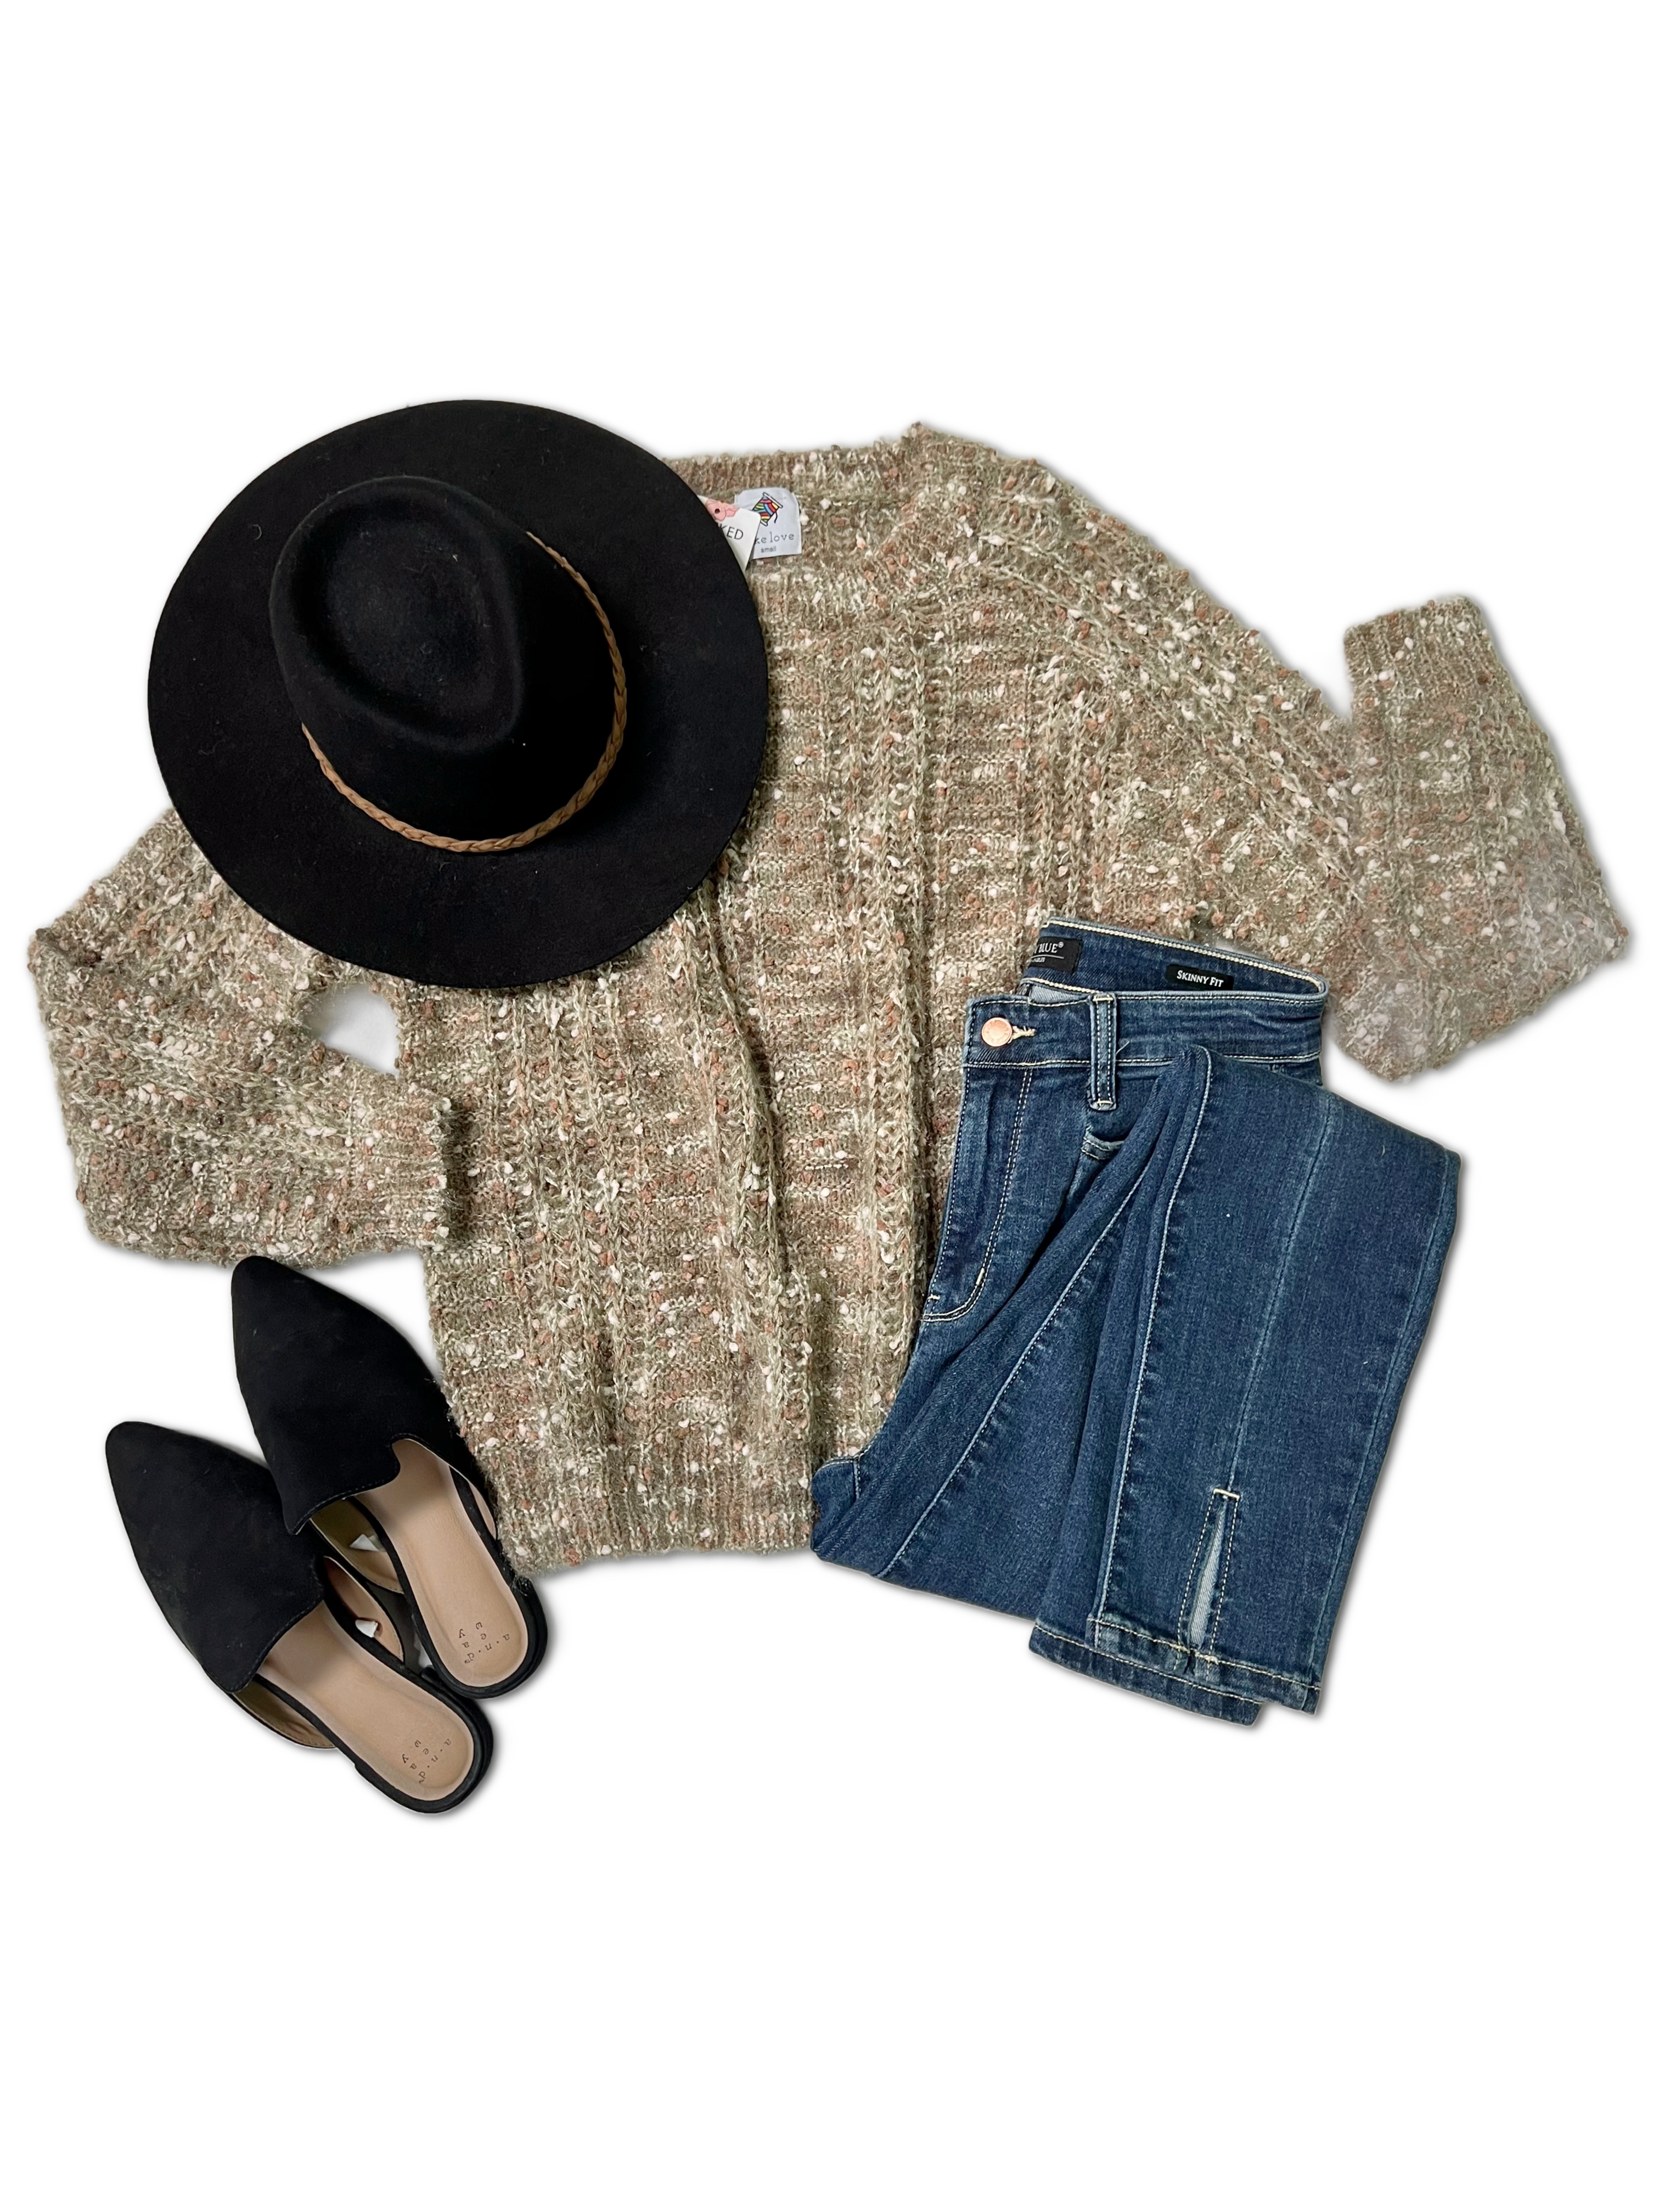 Stunner In Green Sweater  OOTD Boutique Simplified   